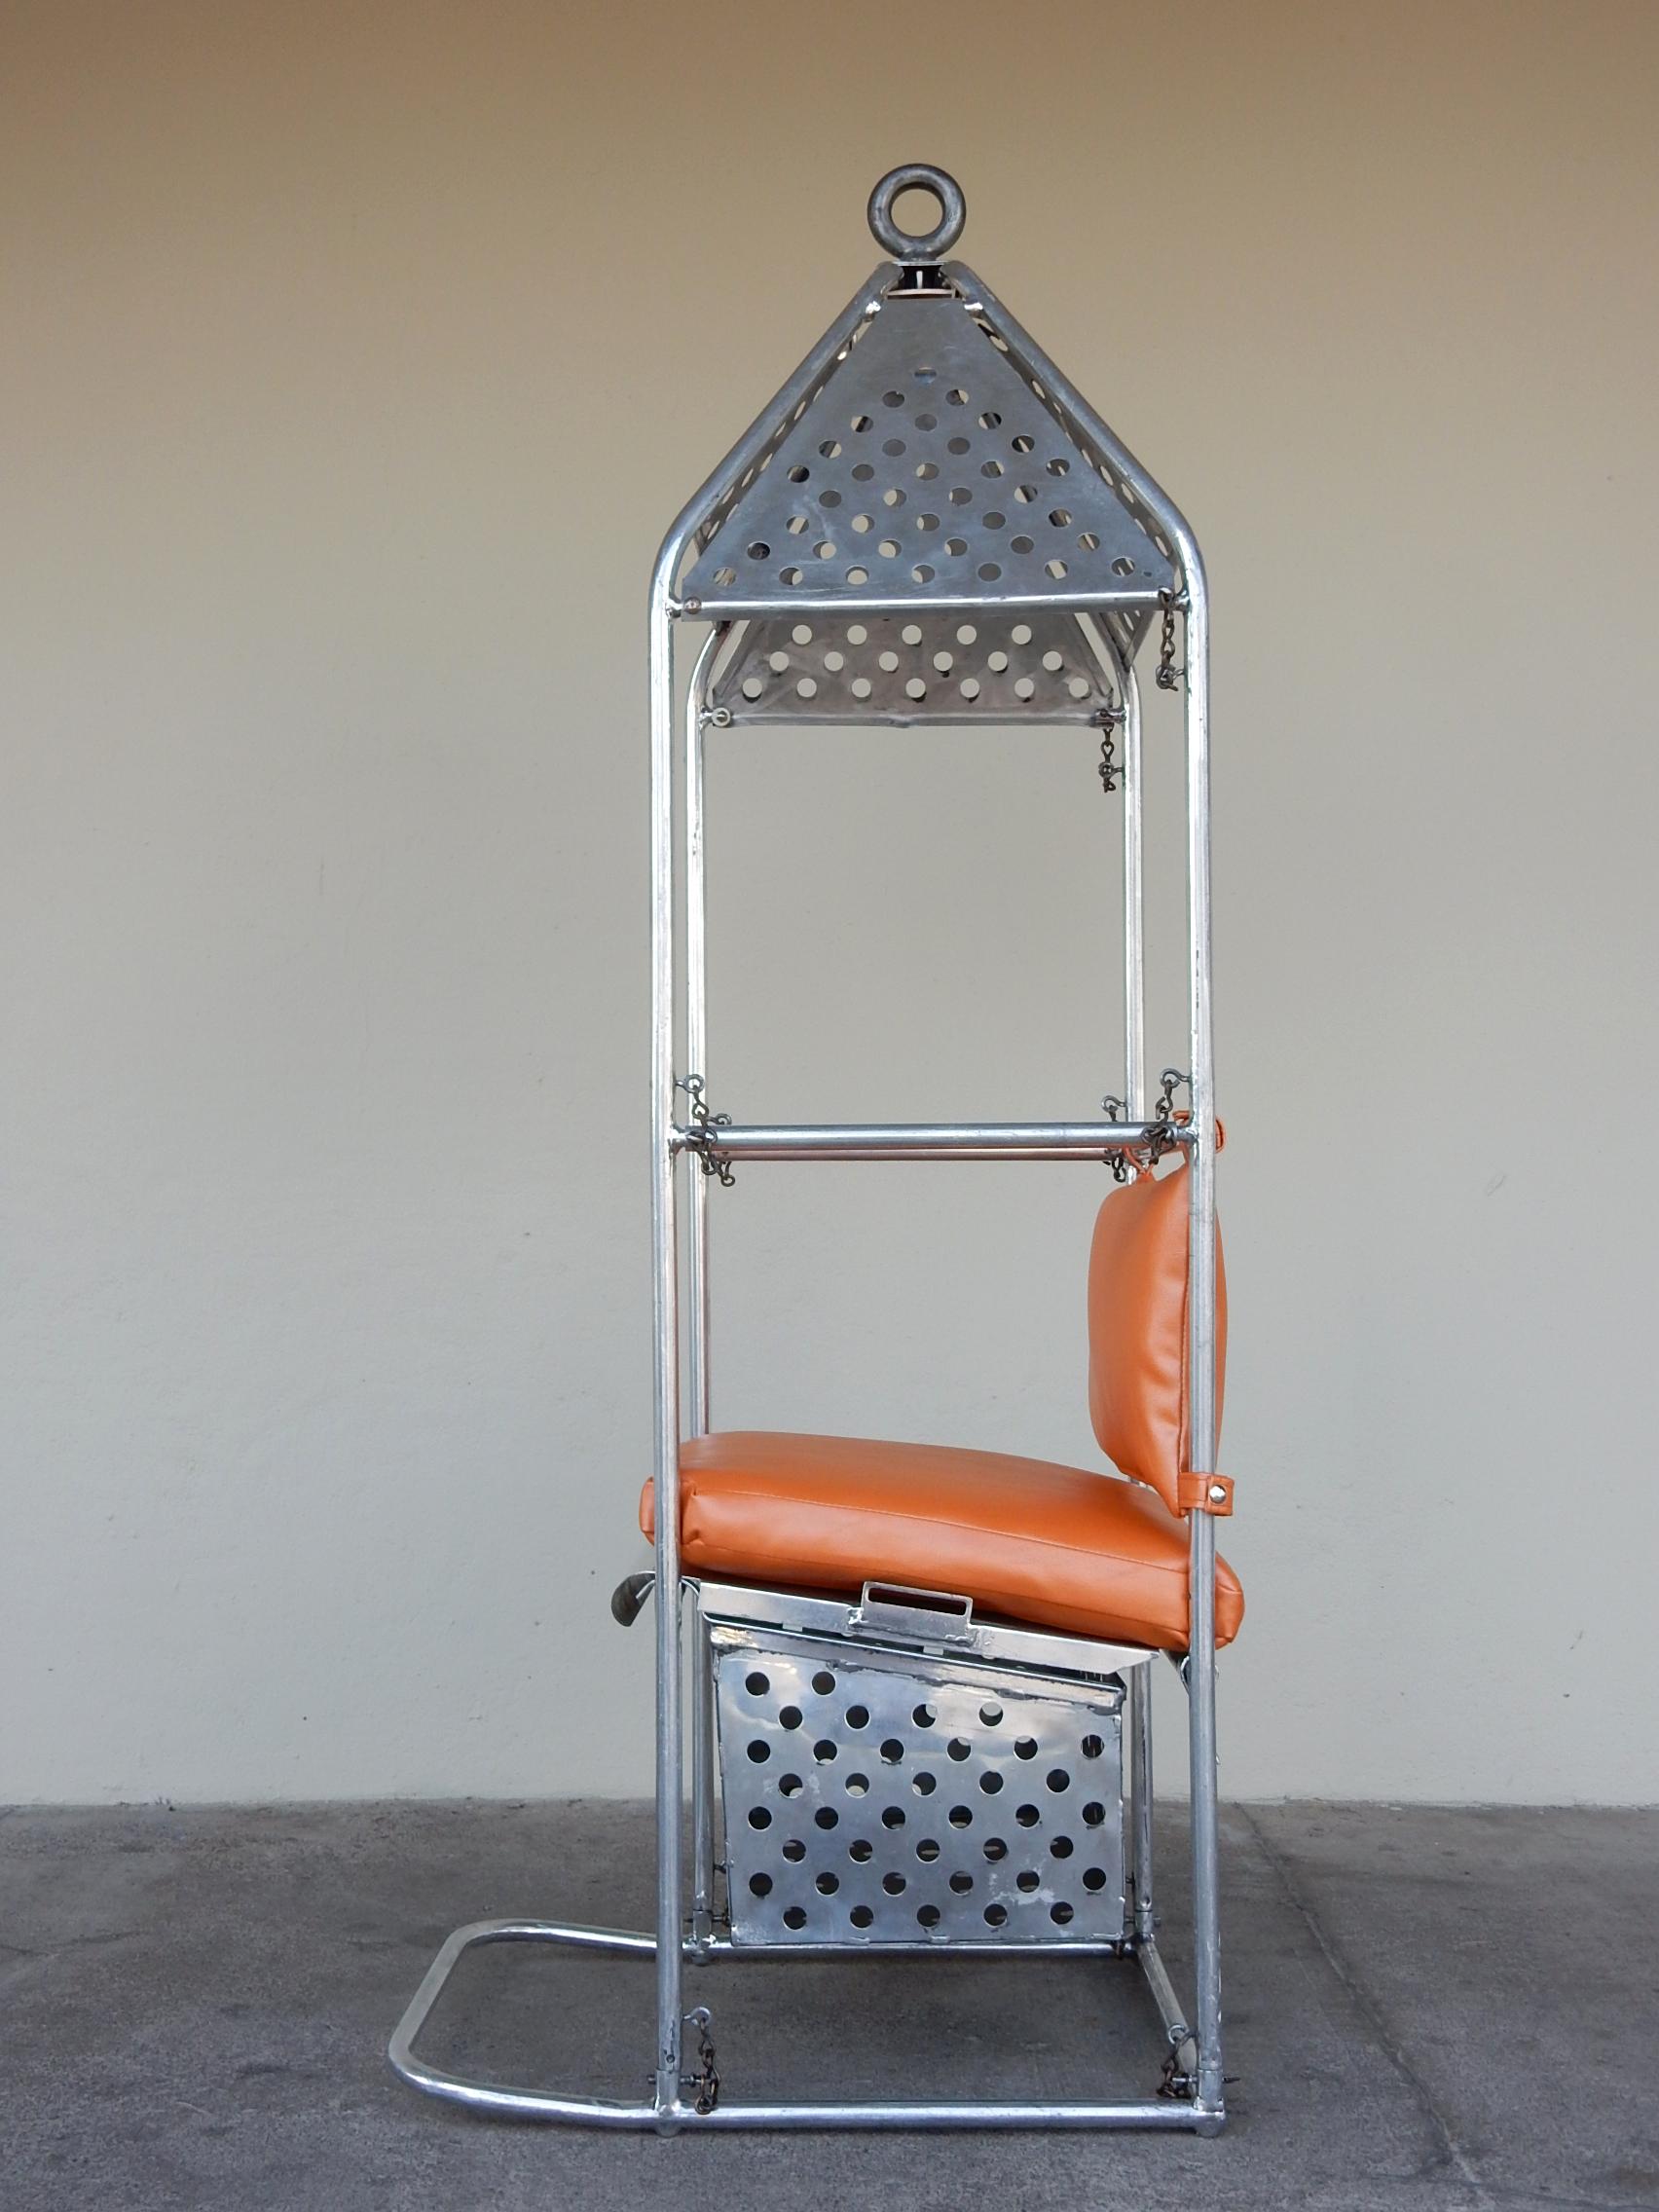 Great conversation piece this custom made circa 1950s hoist chair. 
Via crane, hoist or helicopter... this chair was meant
to get one individual, and their gear, up or down or in and out of someplace.
It is not marked and we could find nothing